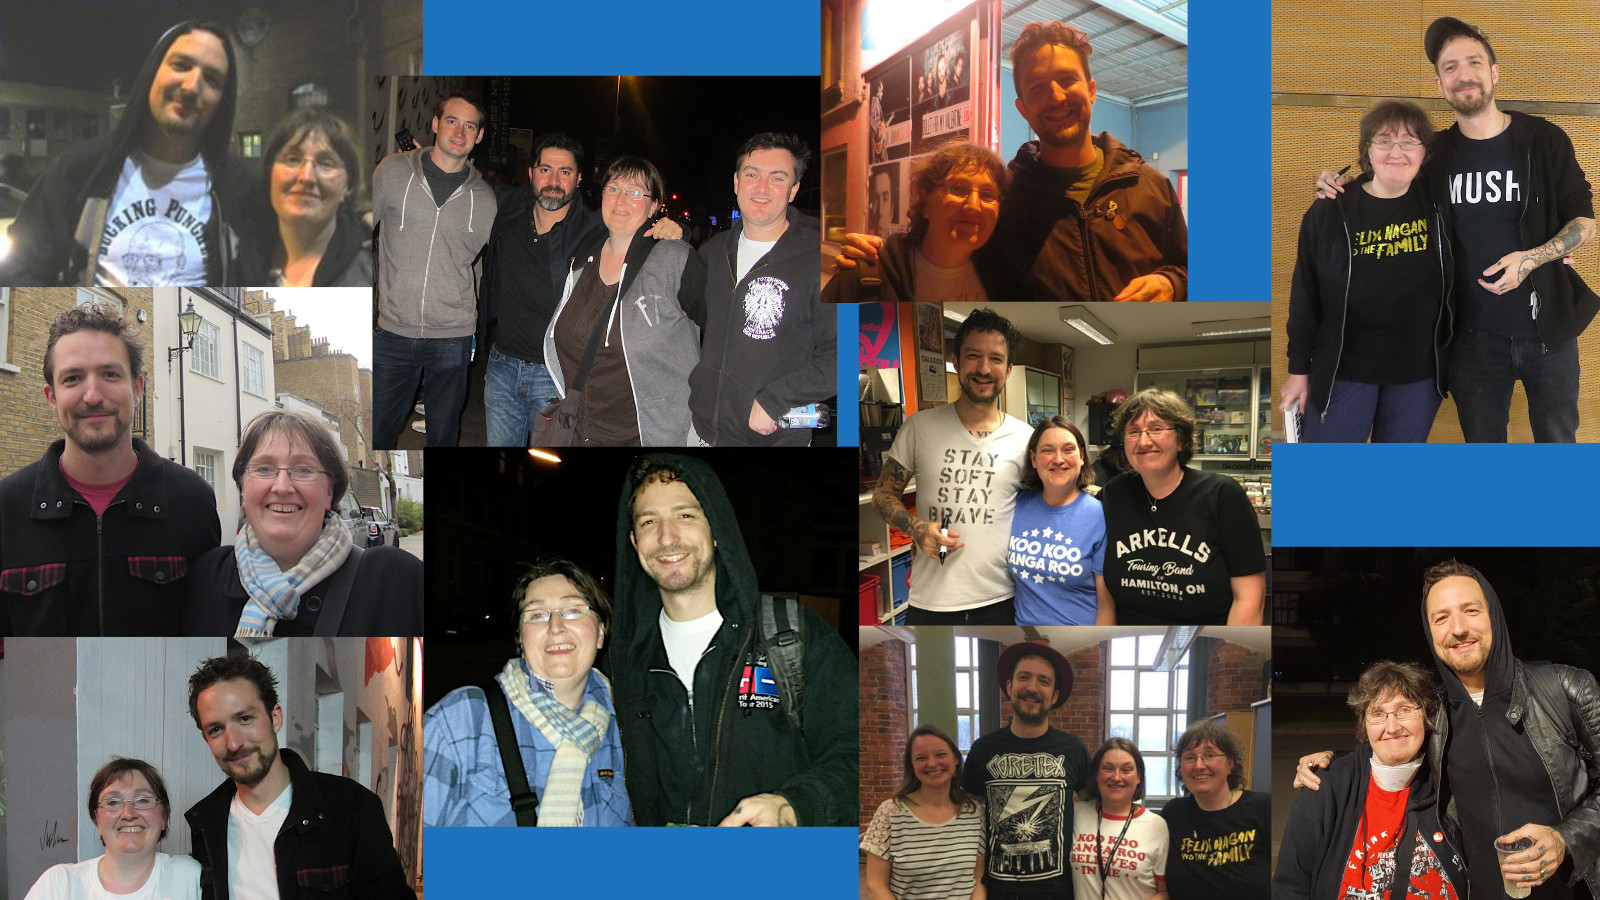 10 photos of Frank Turner and me